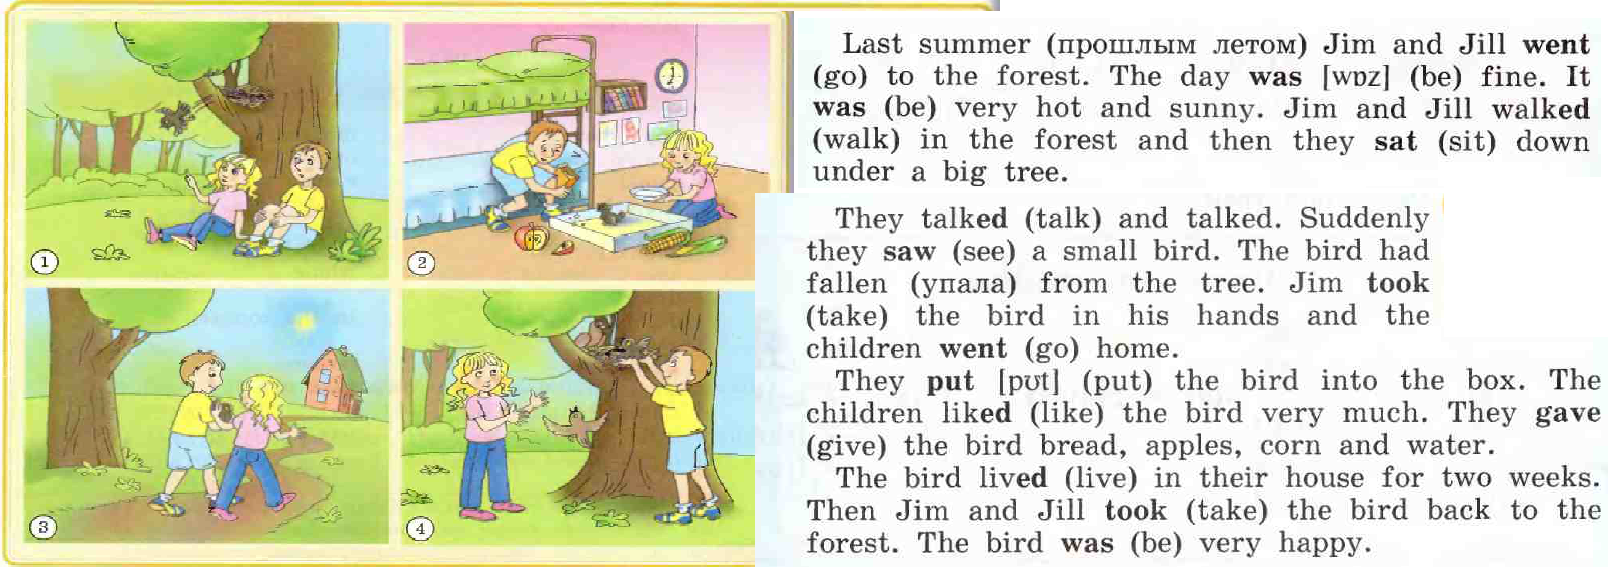 Children like going to the. Биболетова was were. Last Summer Jim and Jill went go to the Forest. Last Summer Jim and Jill went. Джим и Джилл биболетова 3 класс.